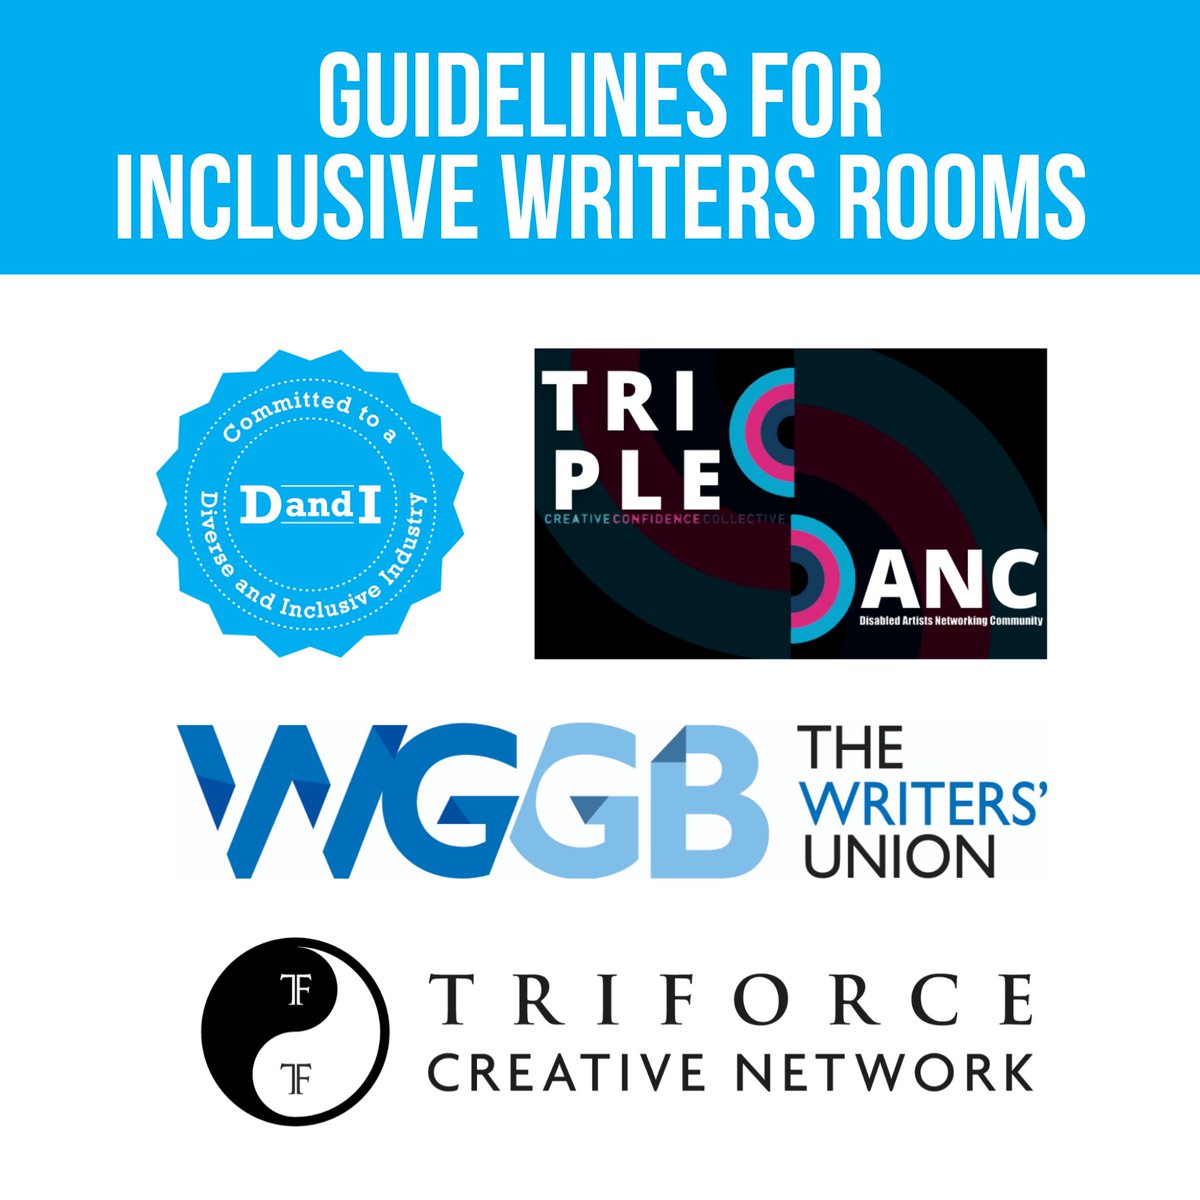 .@TripleC_UK @dandiorguk & @TheWritersGuild #UHCTV

Together we're proud to launch Guidelines for Inclusive Writers Rooms. A set of guidelines from collective voices for making writers rooms inclusive to disabled, deaf & neurodivergent screenwriters

VISIT triplec.org.uk/resources